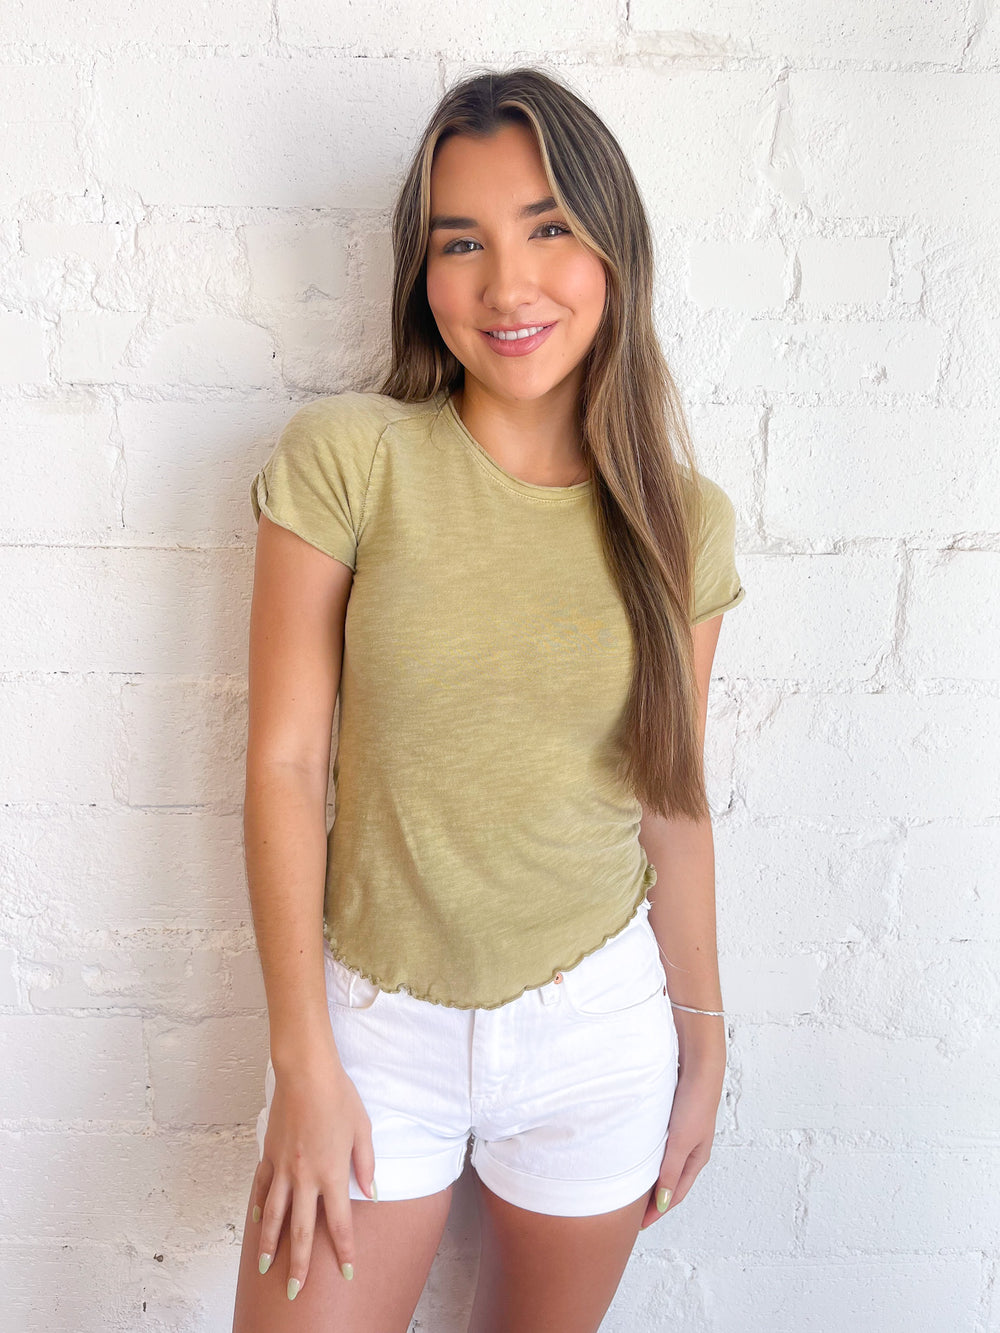 Free People Palm Leaf Be My Baby Tee, Tops, Free People, Adeline, dallas boutique, dallas texas, texas boutique, women's boutique dallas, adeline boutique, dallas boutique, trendy boutique, affordable boutique